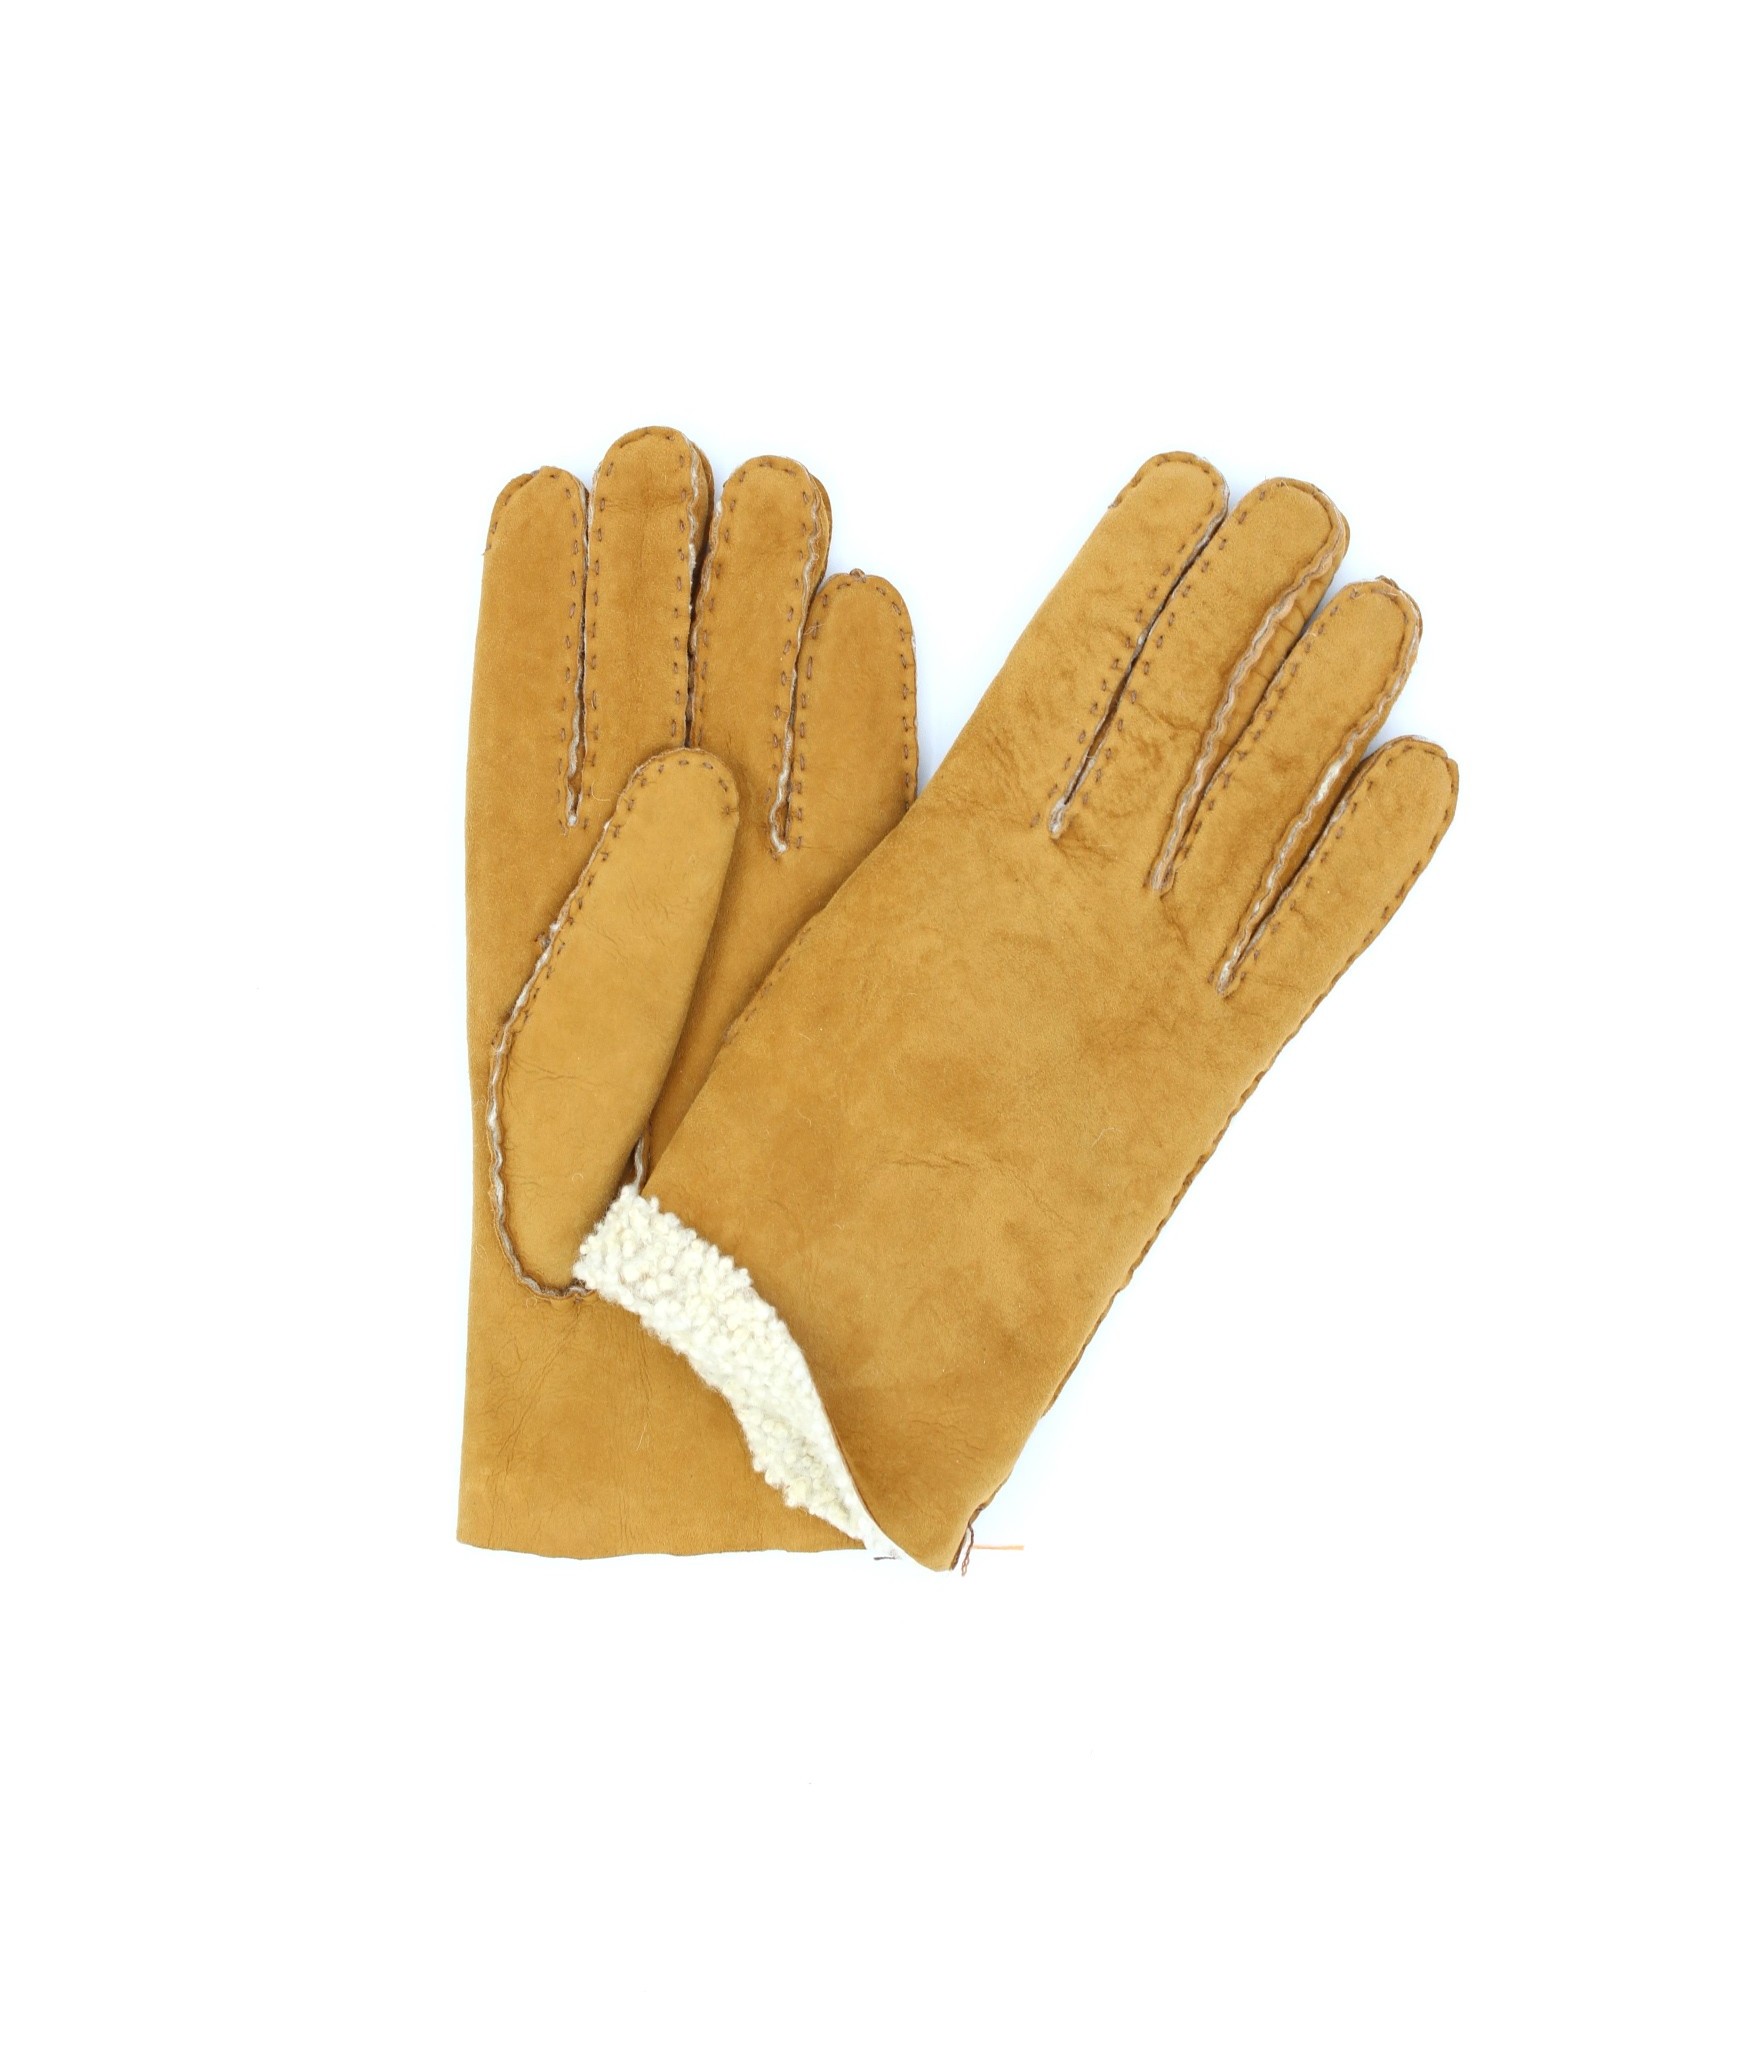 1174  Sheep Skin inside-out Gloves Hand Sewn Camel 